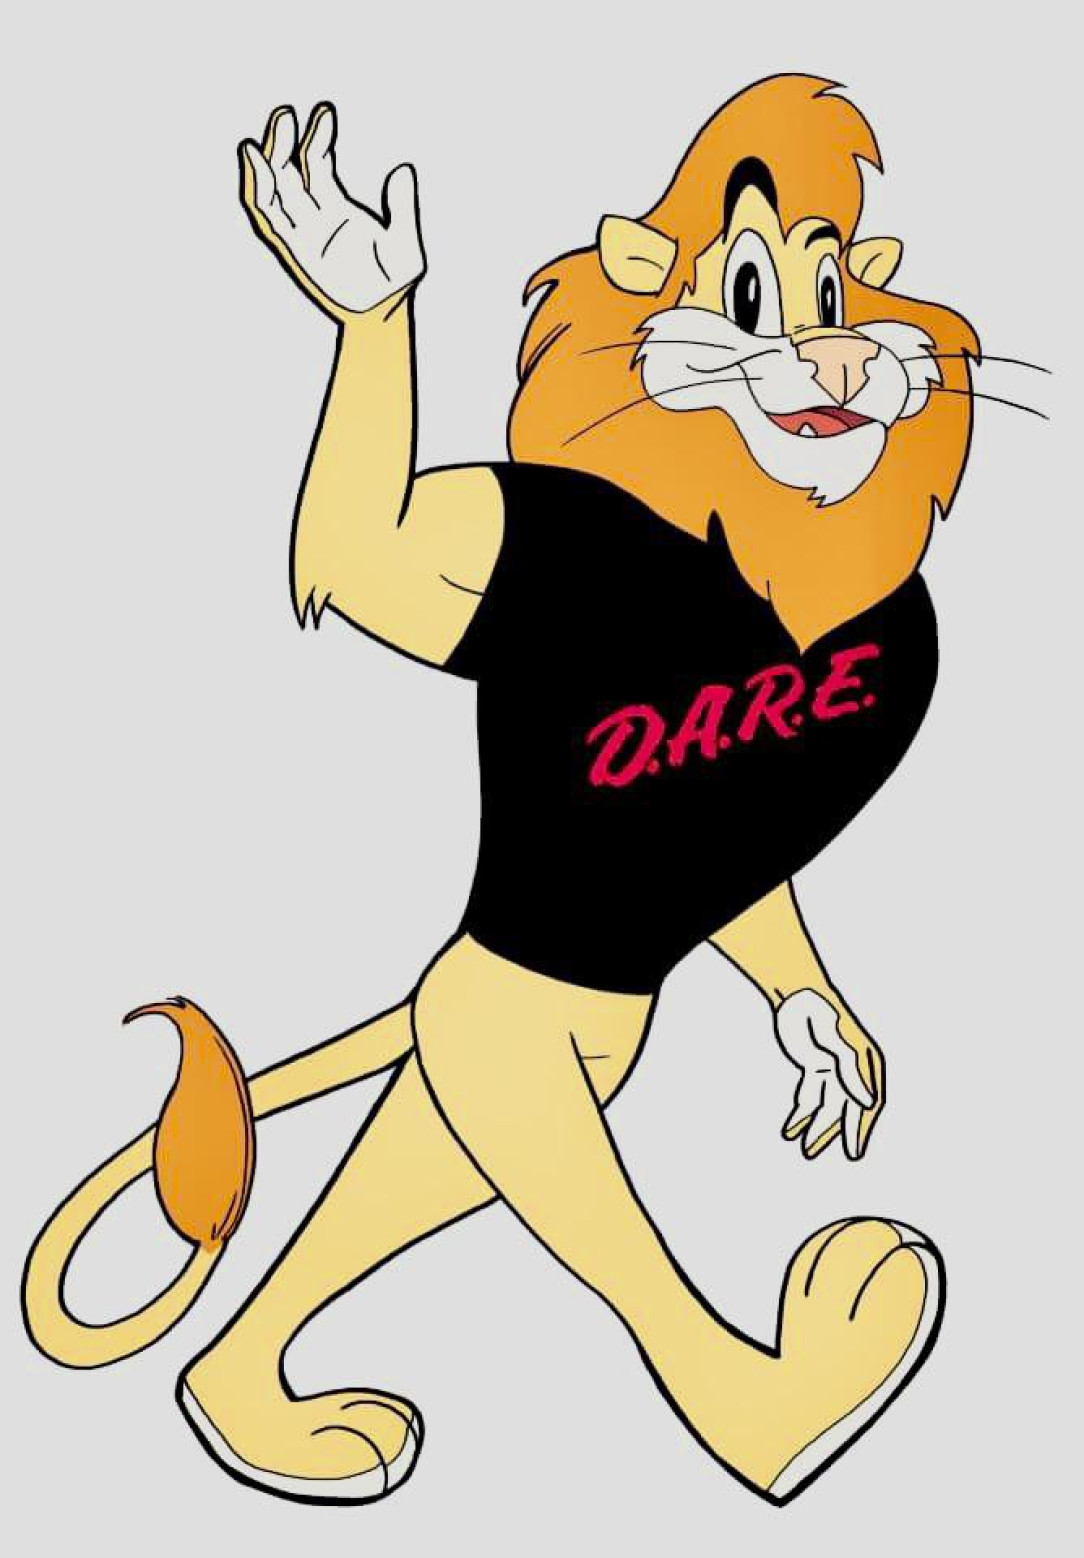 So many of us grew up to let down Darren the DARE lion